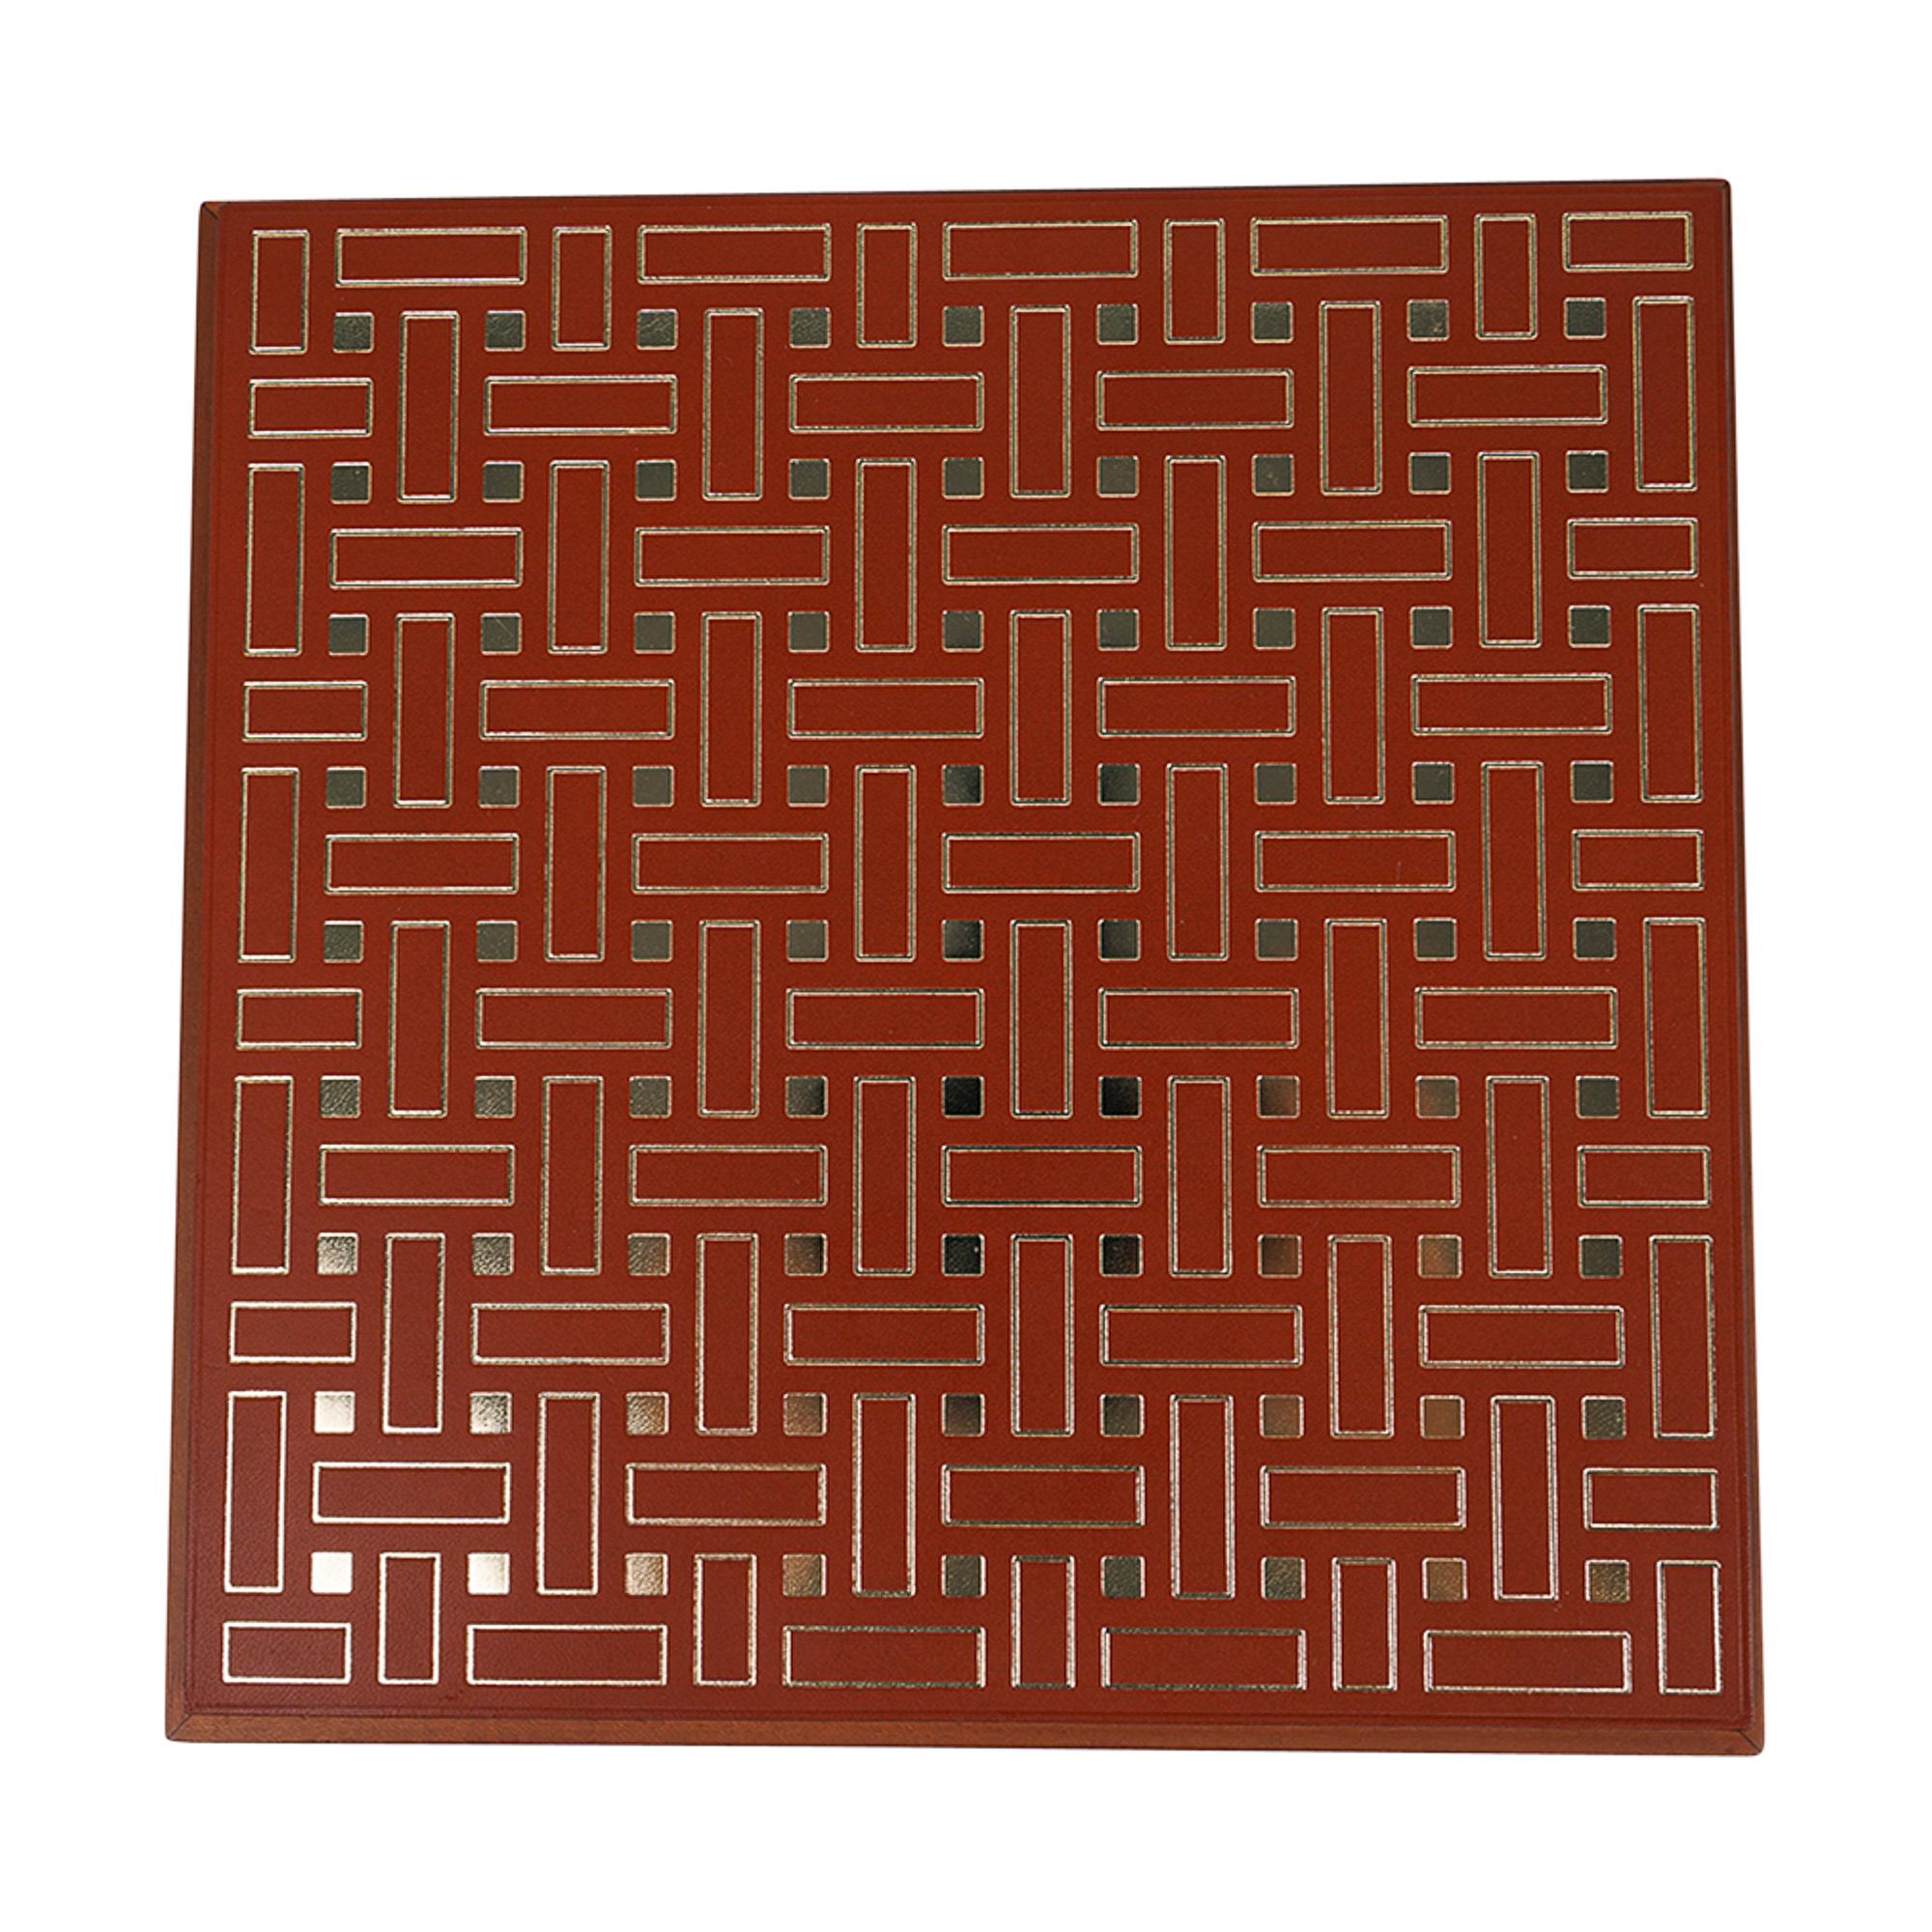 Mightychic offers an Hermes Theoreme Mosaique Or box featured in the Medium model.
Natural Mahogany wood with bridle leather lid sheets stamped with gold Mosaique motif in gold.
Bridle leather lid is hot foil stamped using traditional bookbinding